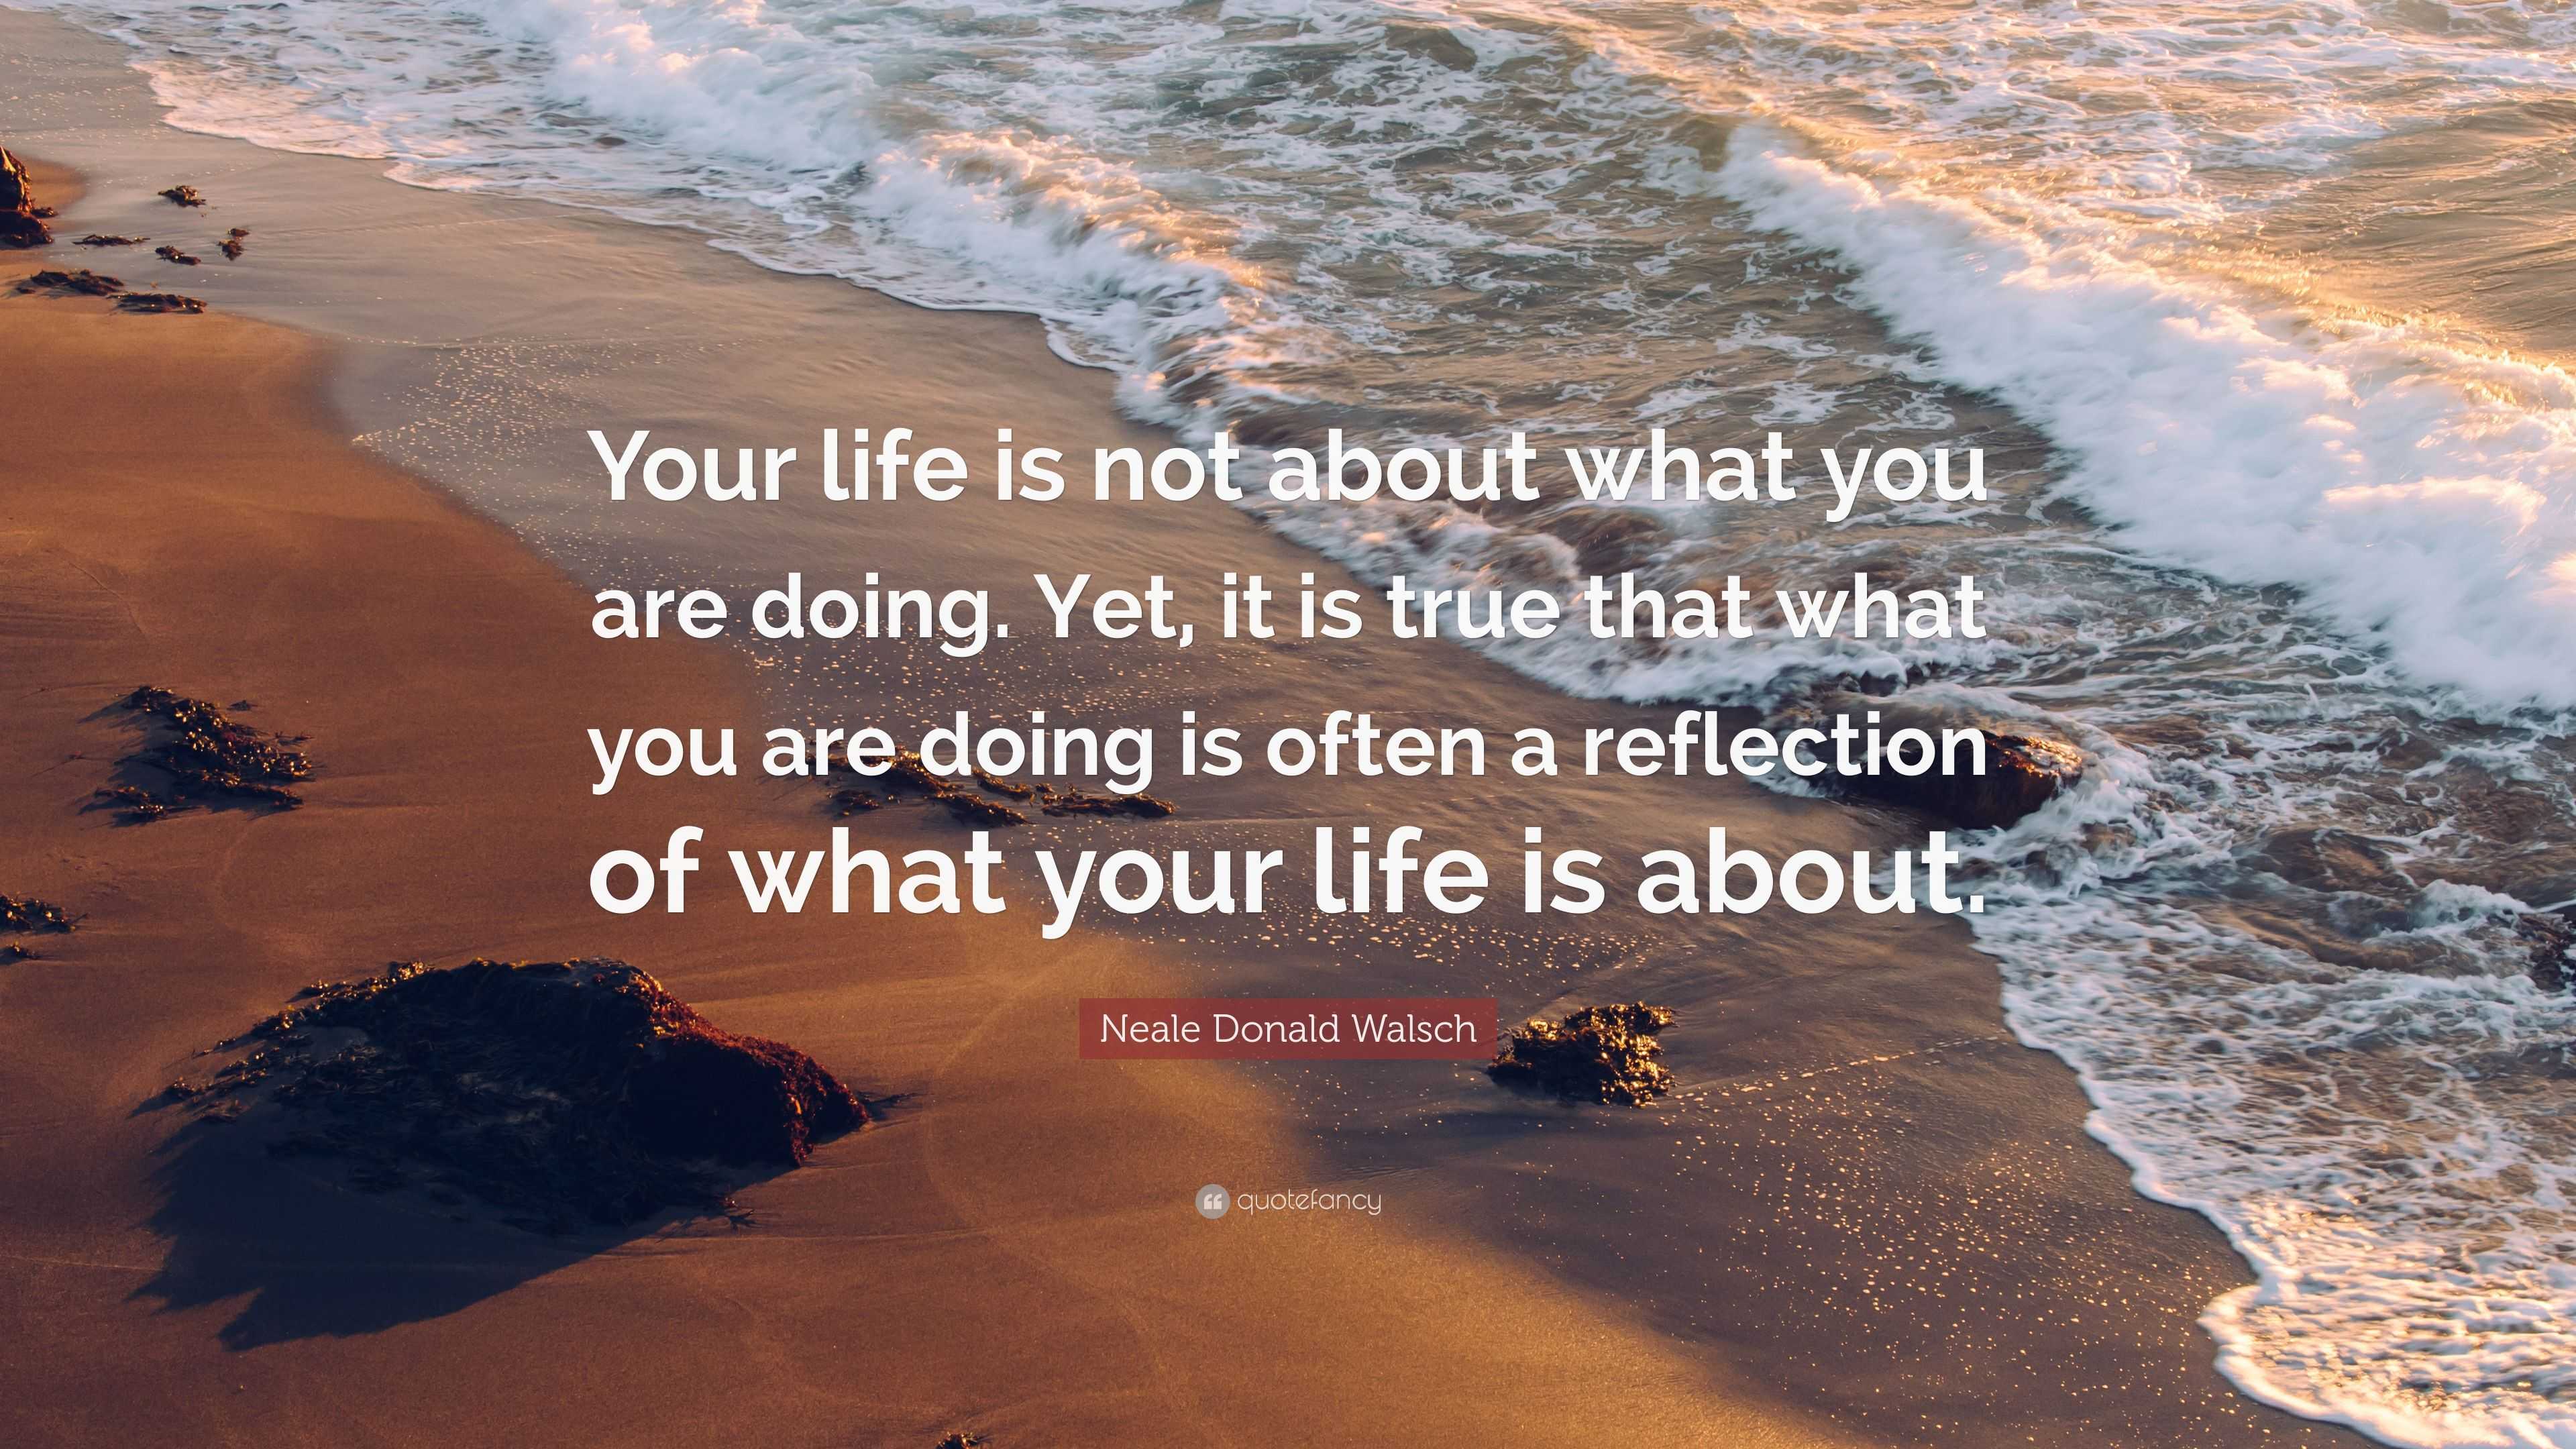 Neale Donald Walsch Quote: “Your life is not about what you are doing ...